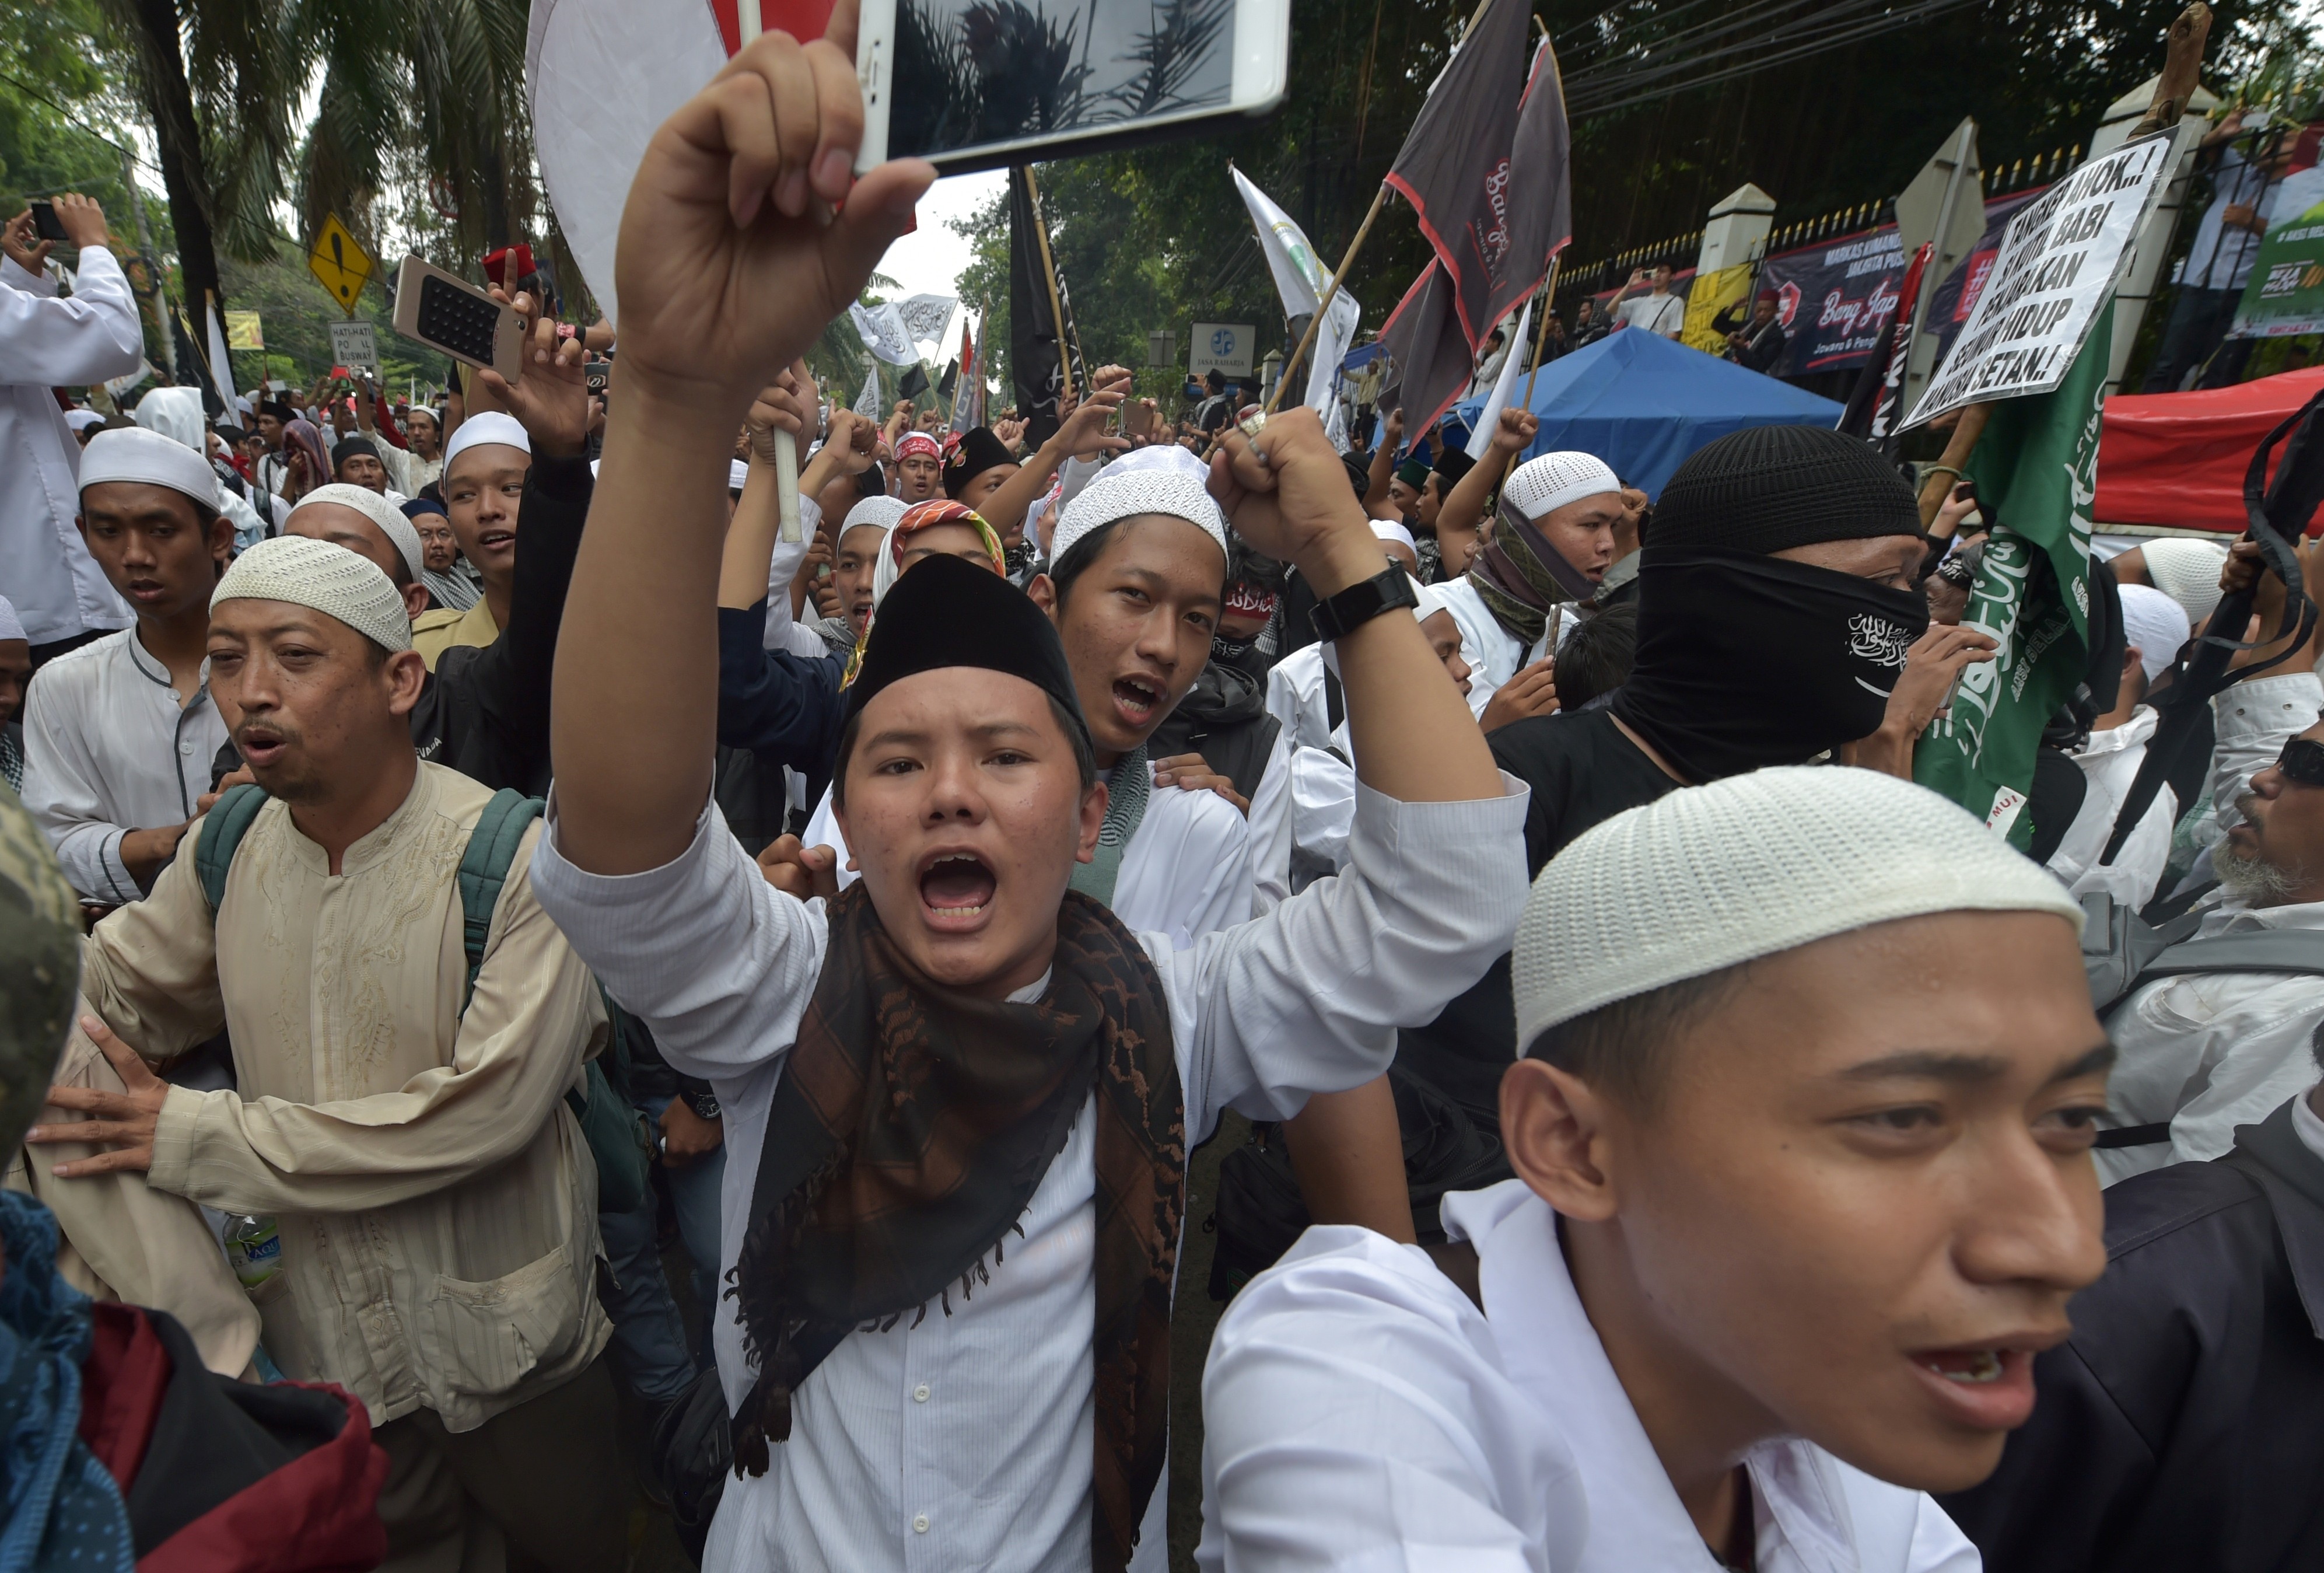 Imprisonment of Basuki ‘Ahok’ Purnama, Jakarta’s Christian leader, on blasphemy charges creates perception the judiciary has become part of rising intolerance in the Muslim-majority country